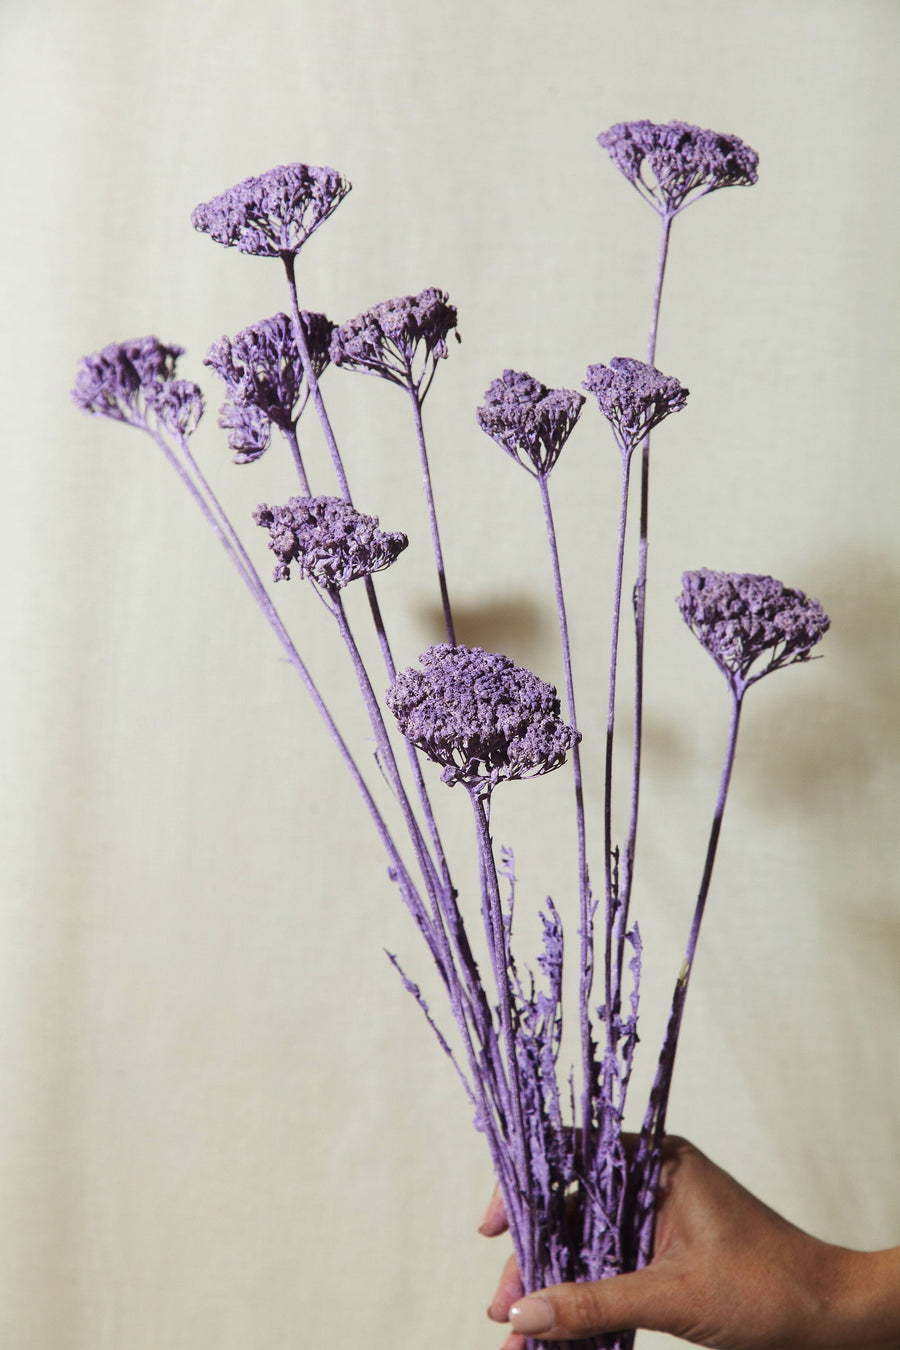 Idlewild Floral Co. Bunches Lilac Yarrow